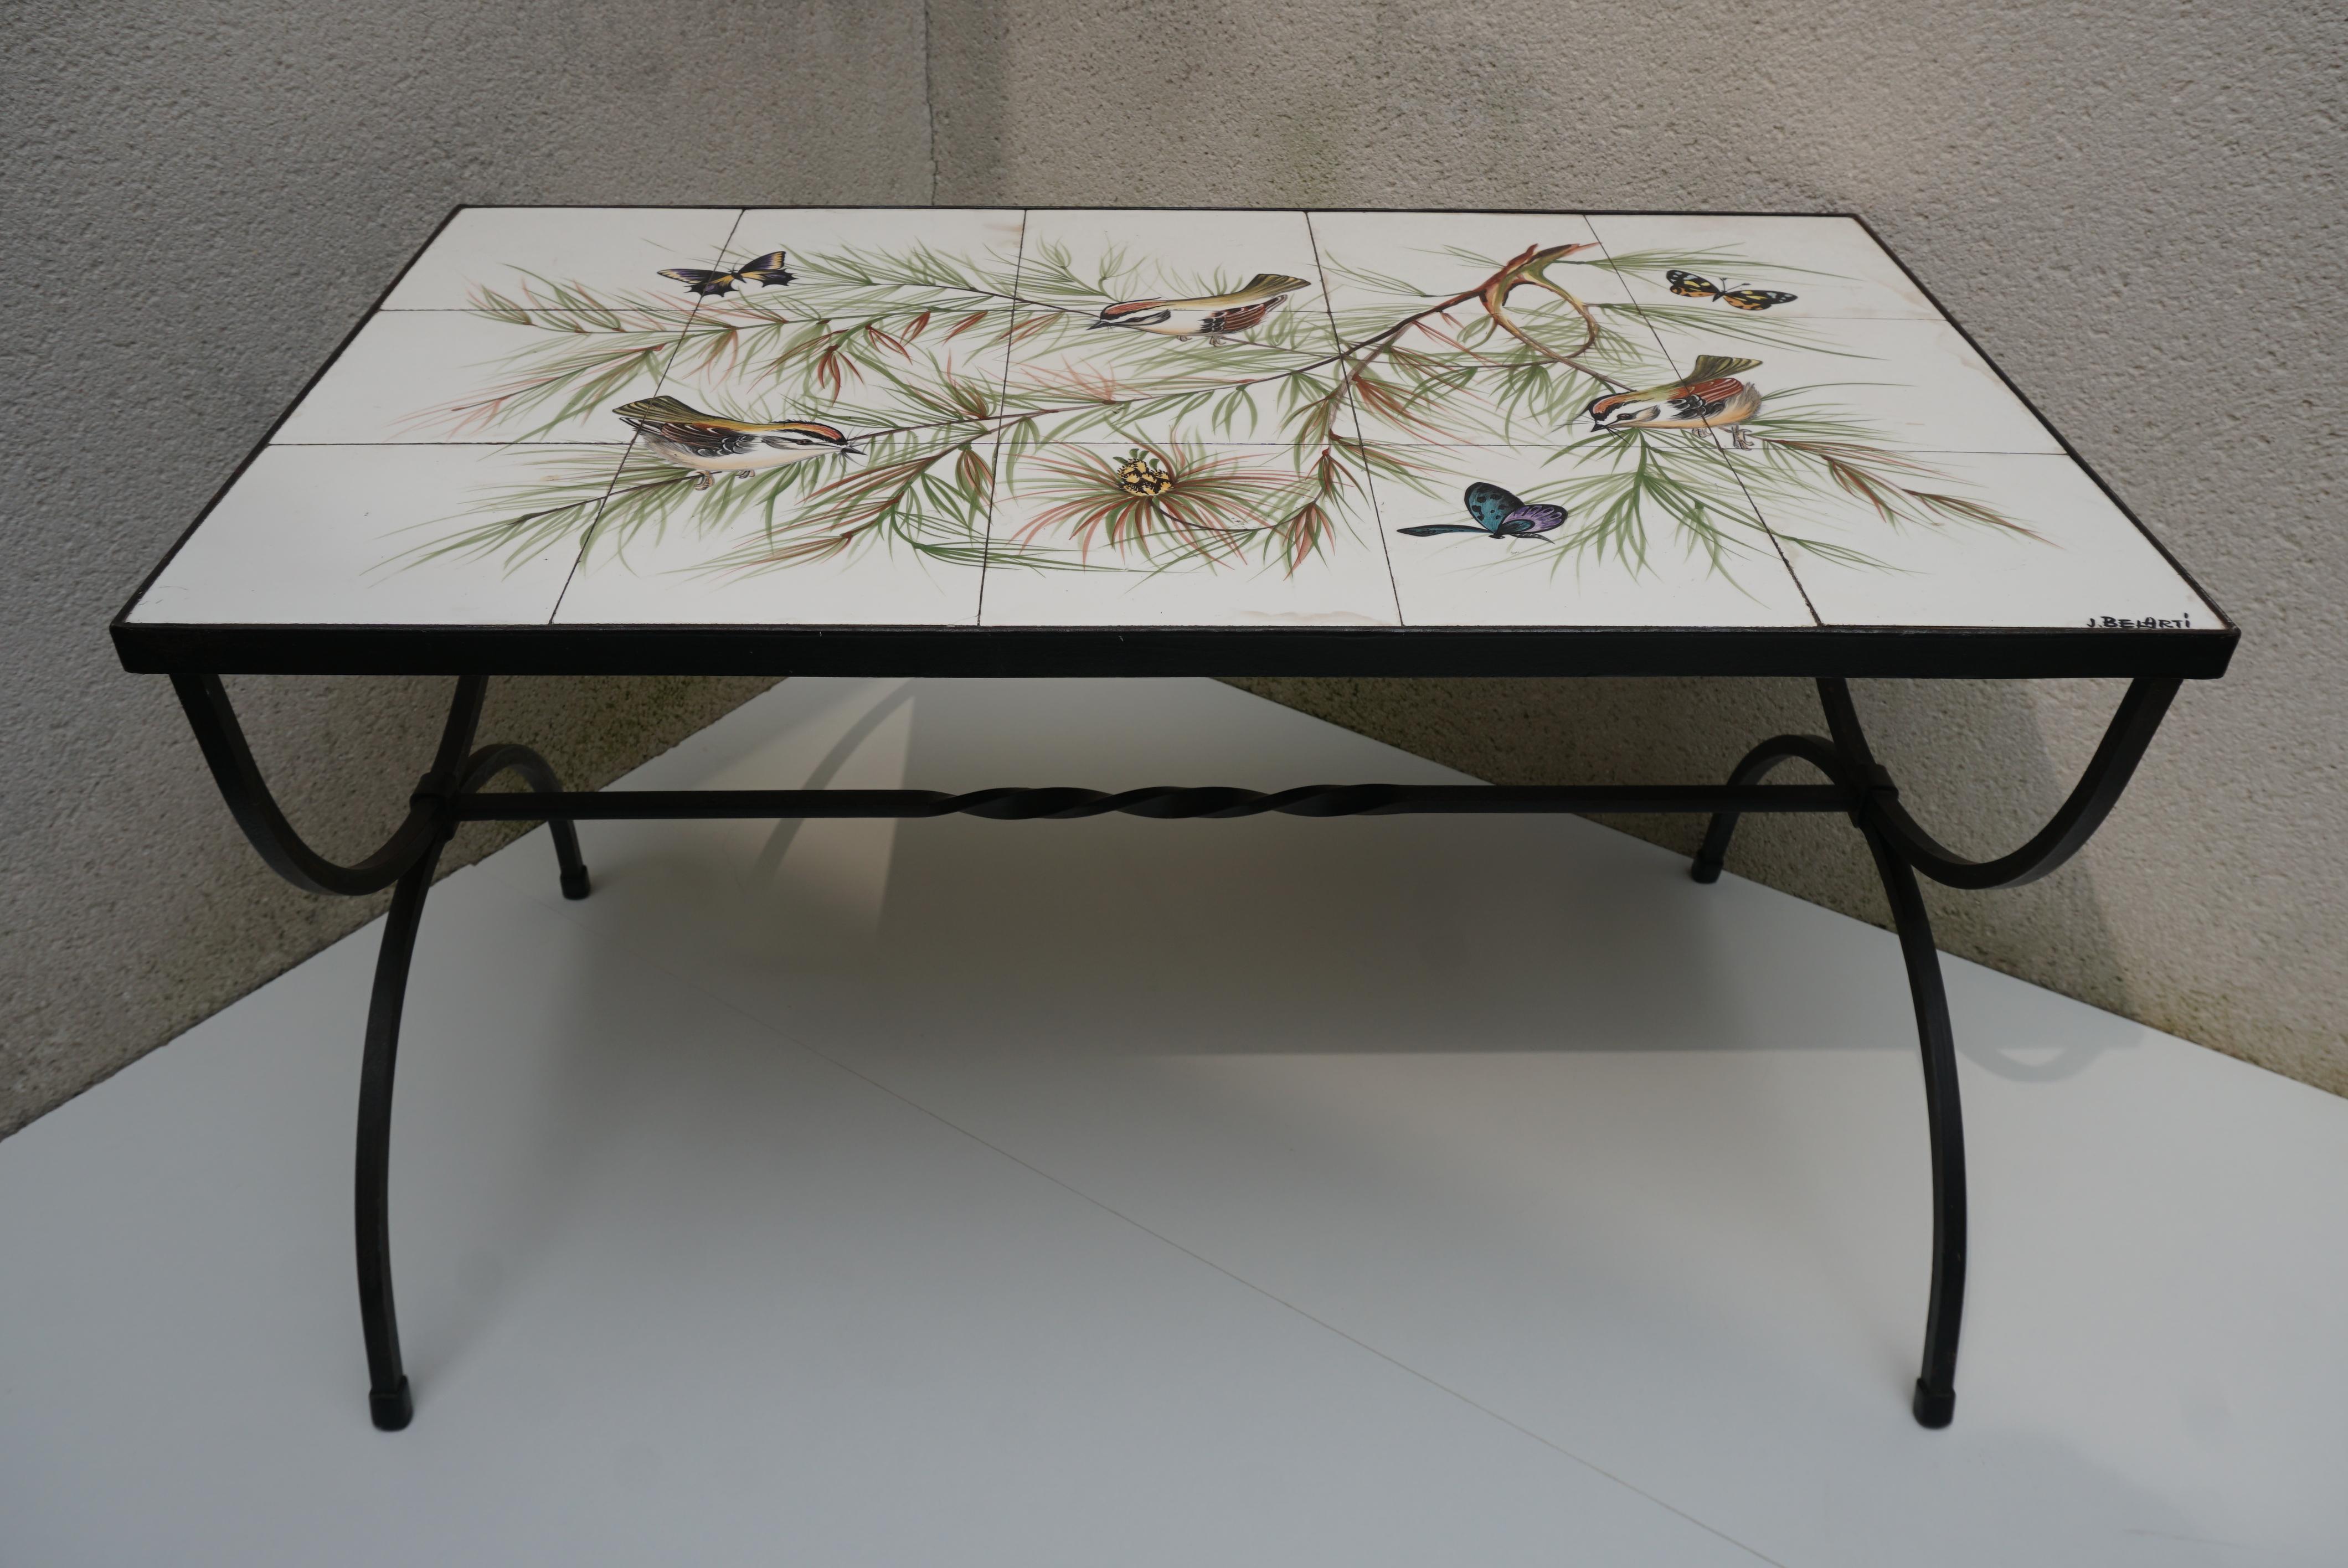 Italian Belarti Ceramic Tile Side Coffee Table with Birds and Butterflies, 1960s For Sale